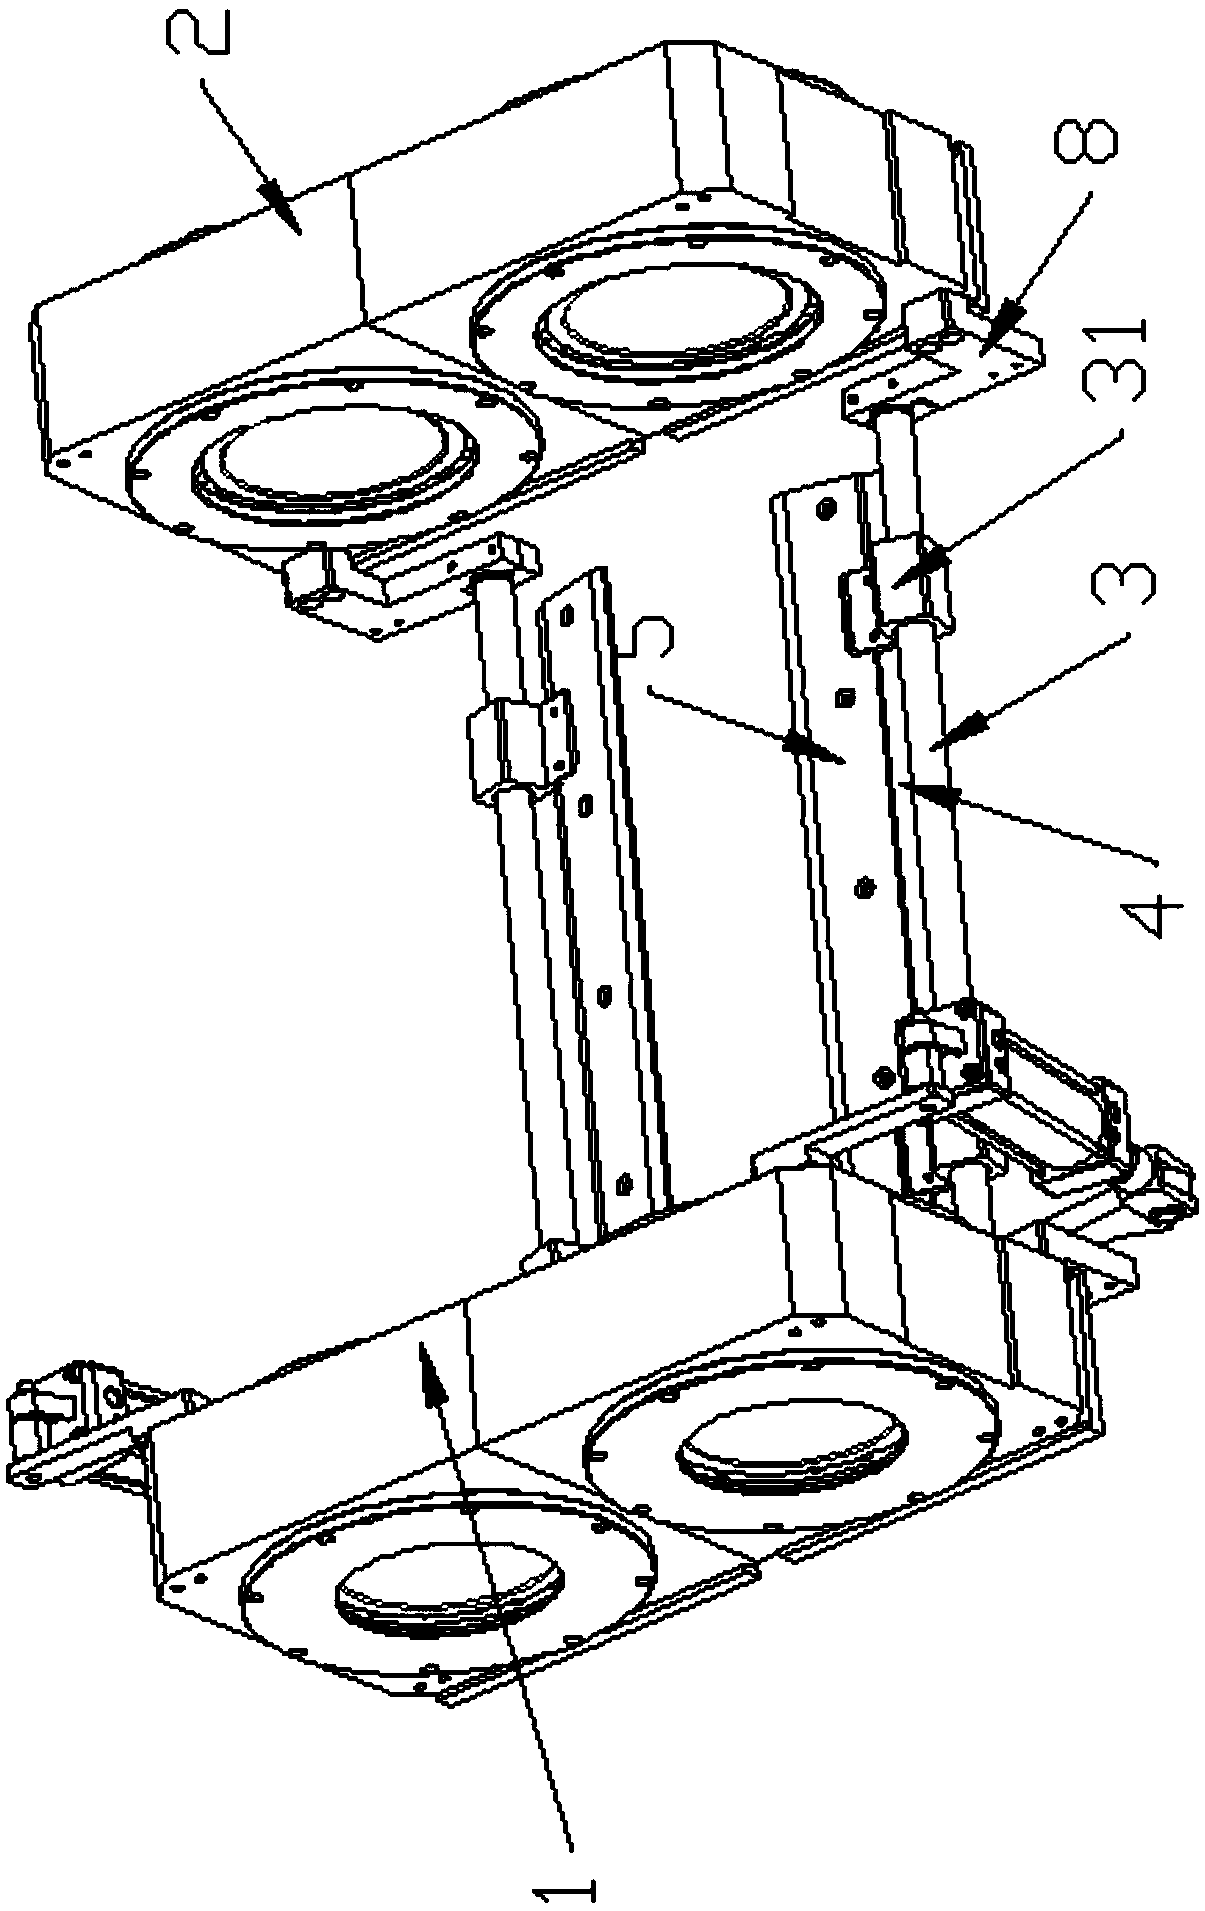 Structure for cleaning bottom of drum for rubber processing